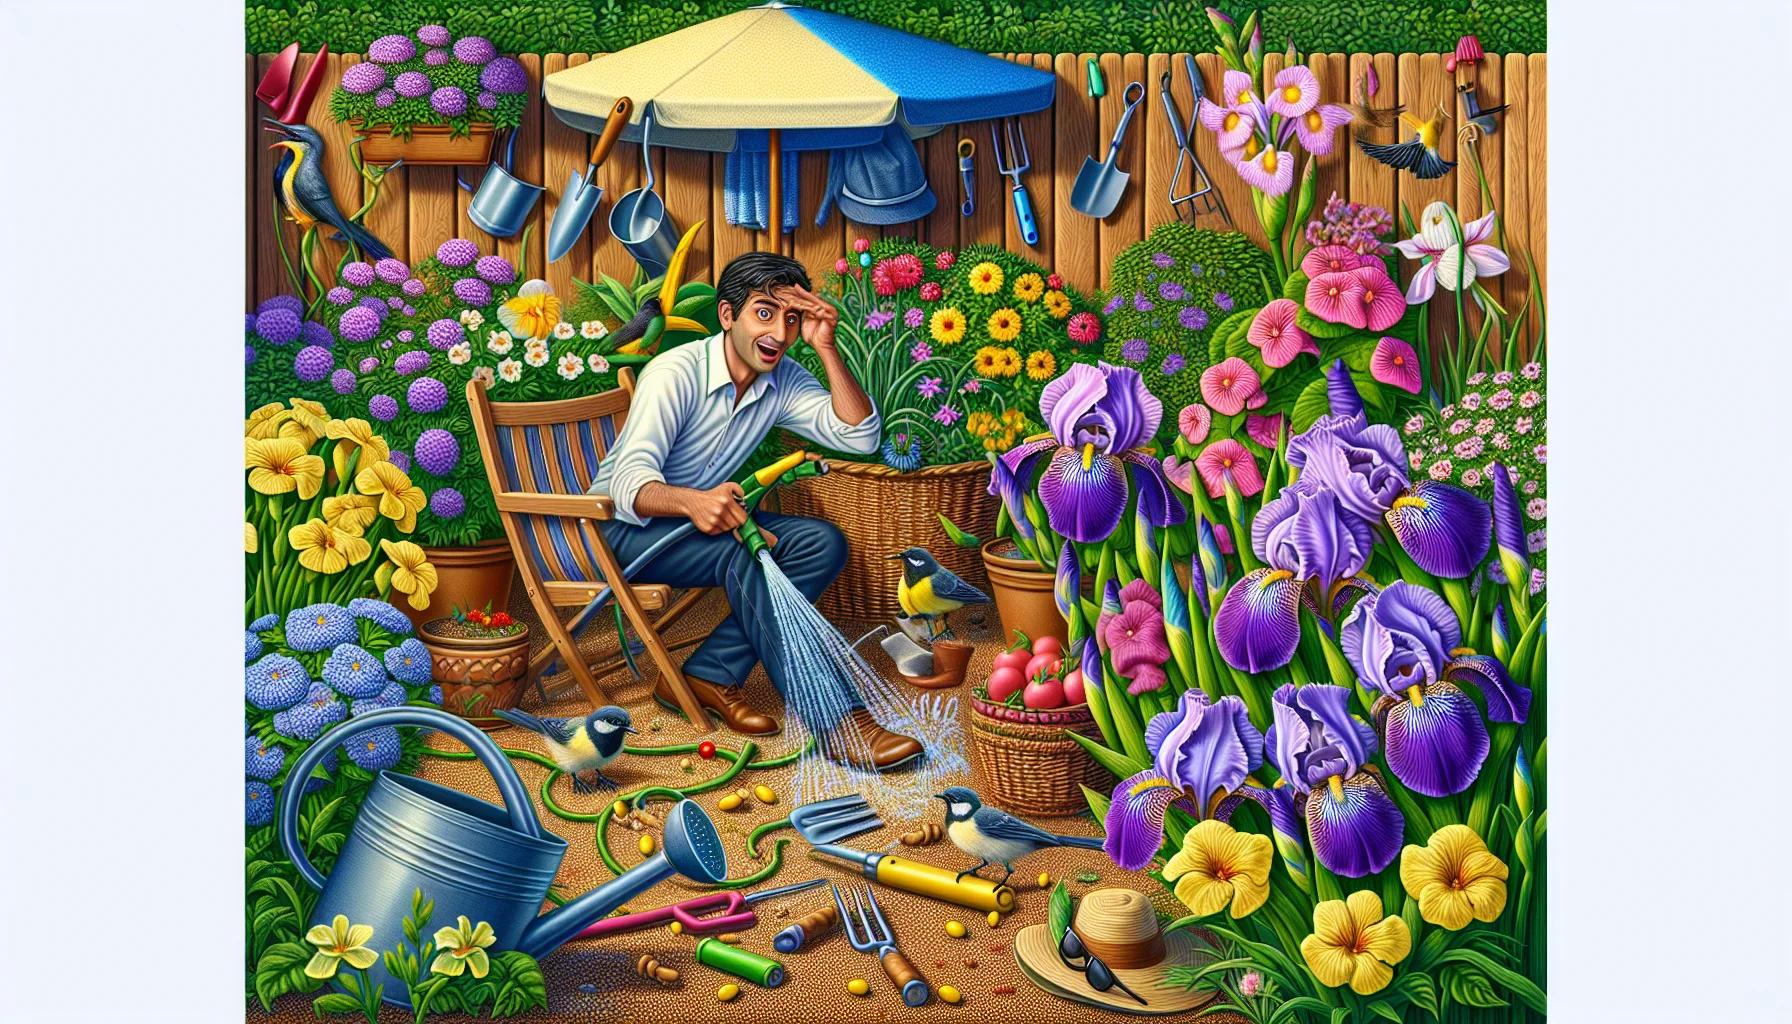 Create an intricate image of a playful gardening scenario set in a lush backyard. Amidst cheerful blooming flowers, utensils and gardening gloves scattered haphazardly. The protagonist, a South Asian male with a hint of mirth in his hazel eyes, accidentally waters himself instead of the flower pots, featuring vivid Iris flowers in hues of purple, yellow, and white. Birds partaking in the unexpected mayhem, seeds scattering and a sunhat making an odd but lovely umbrella. This lighthearted view aims to show the joy and humor that one can find in the pleasant hobby of gardening.